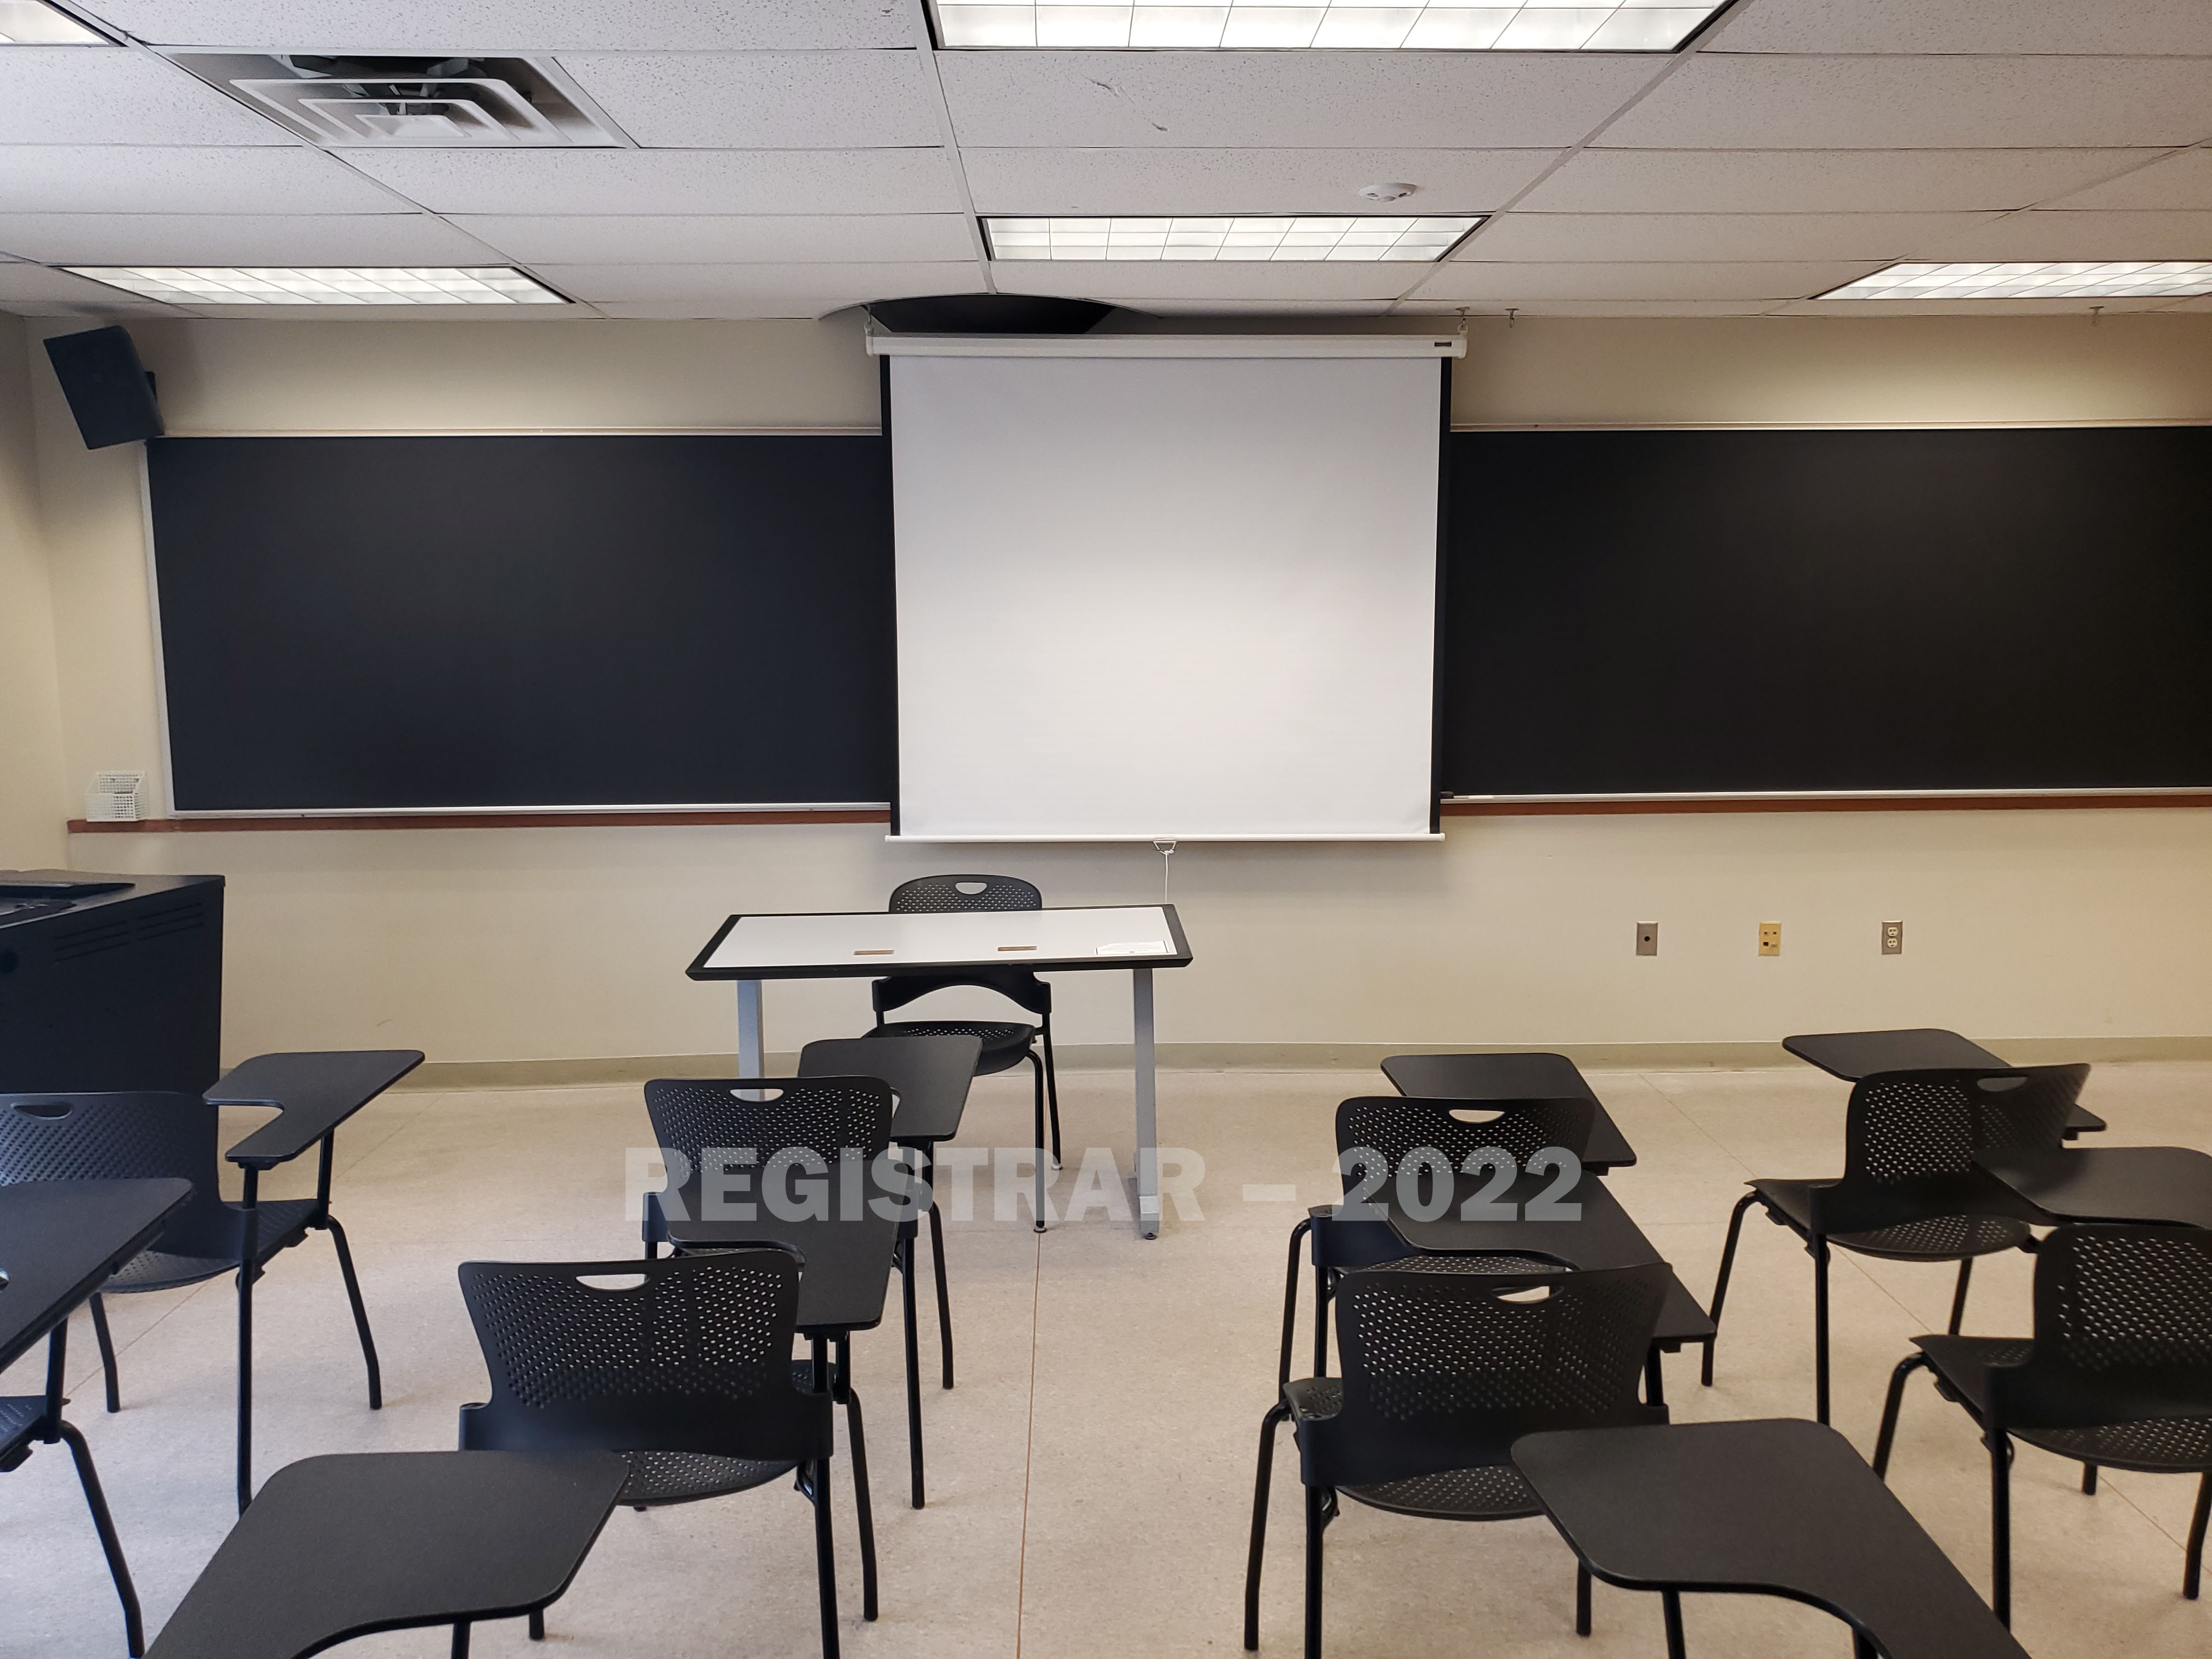 Enarson Classroom Building room 358 view from the back of the room with projector screen down